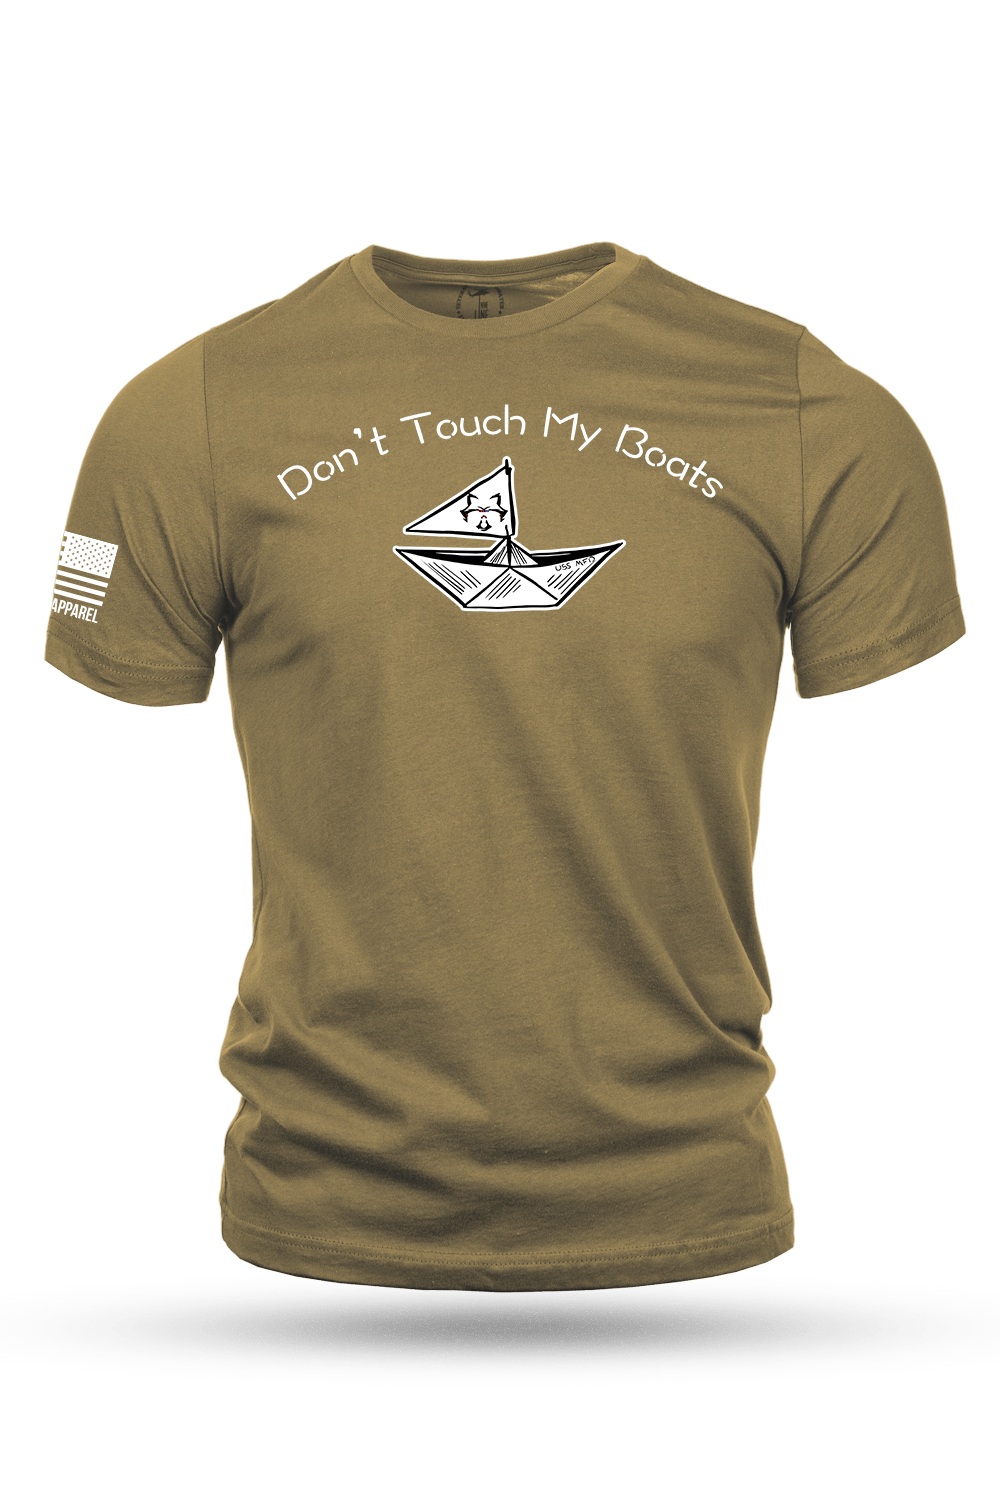 T-Shirt - Don't touch my boats